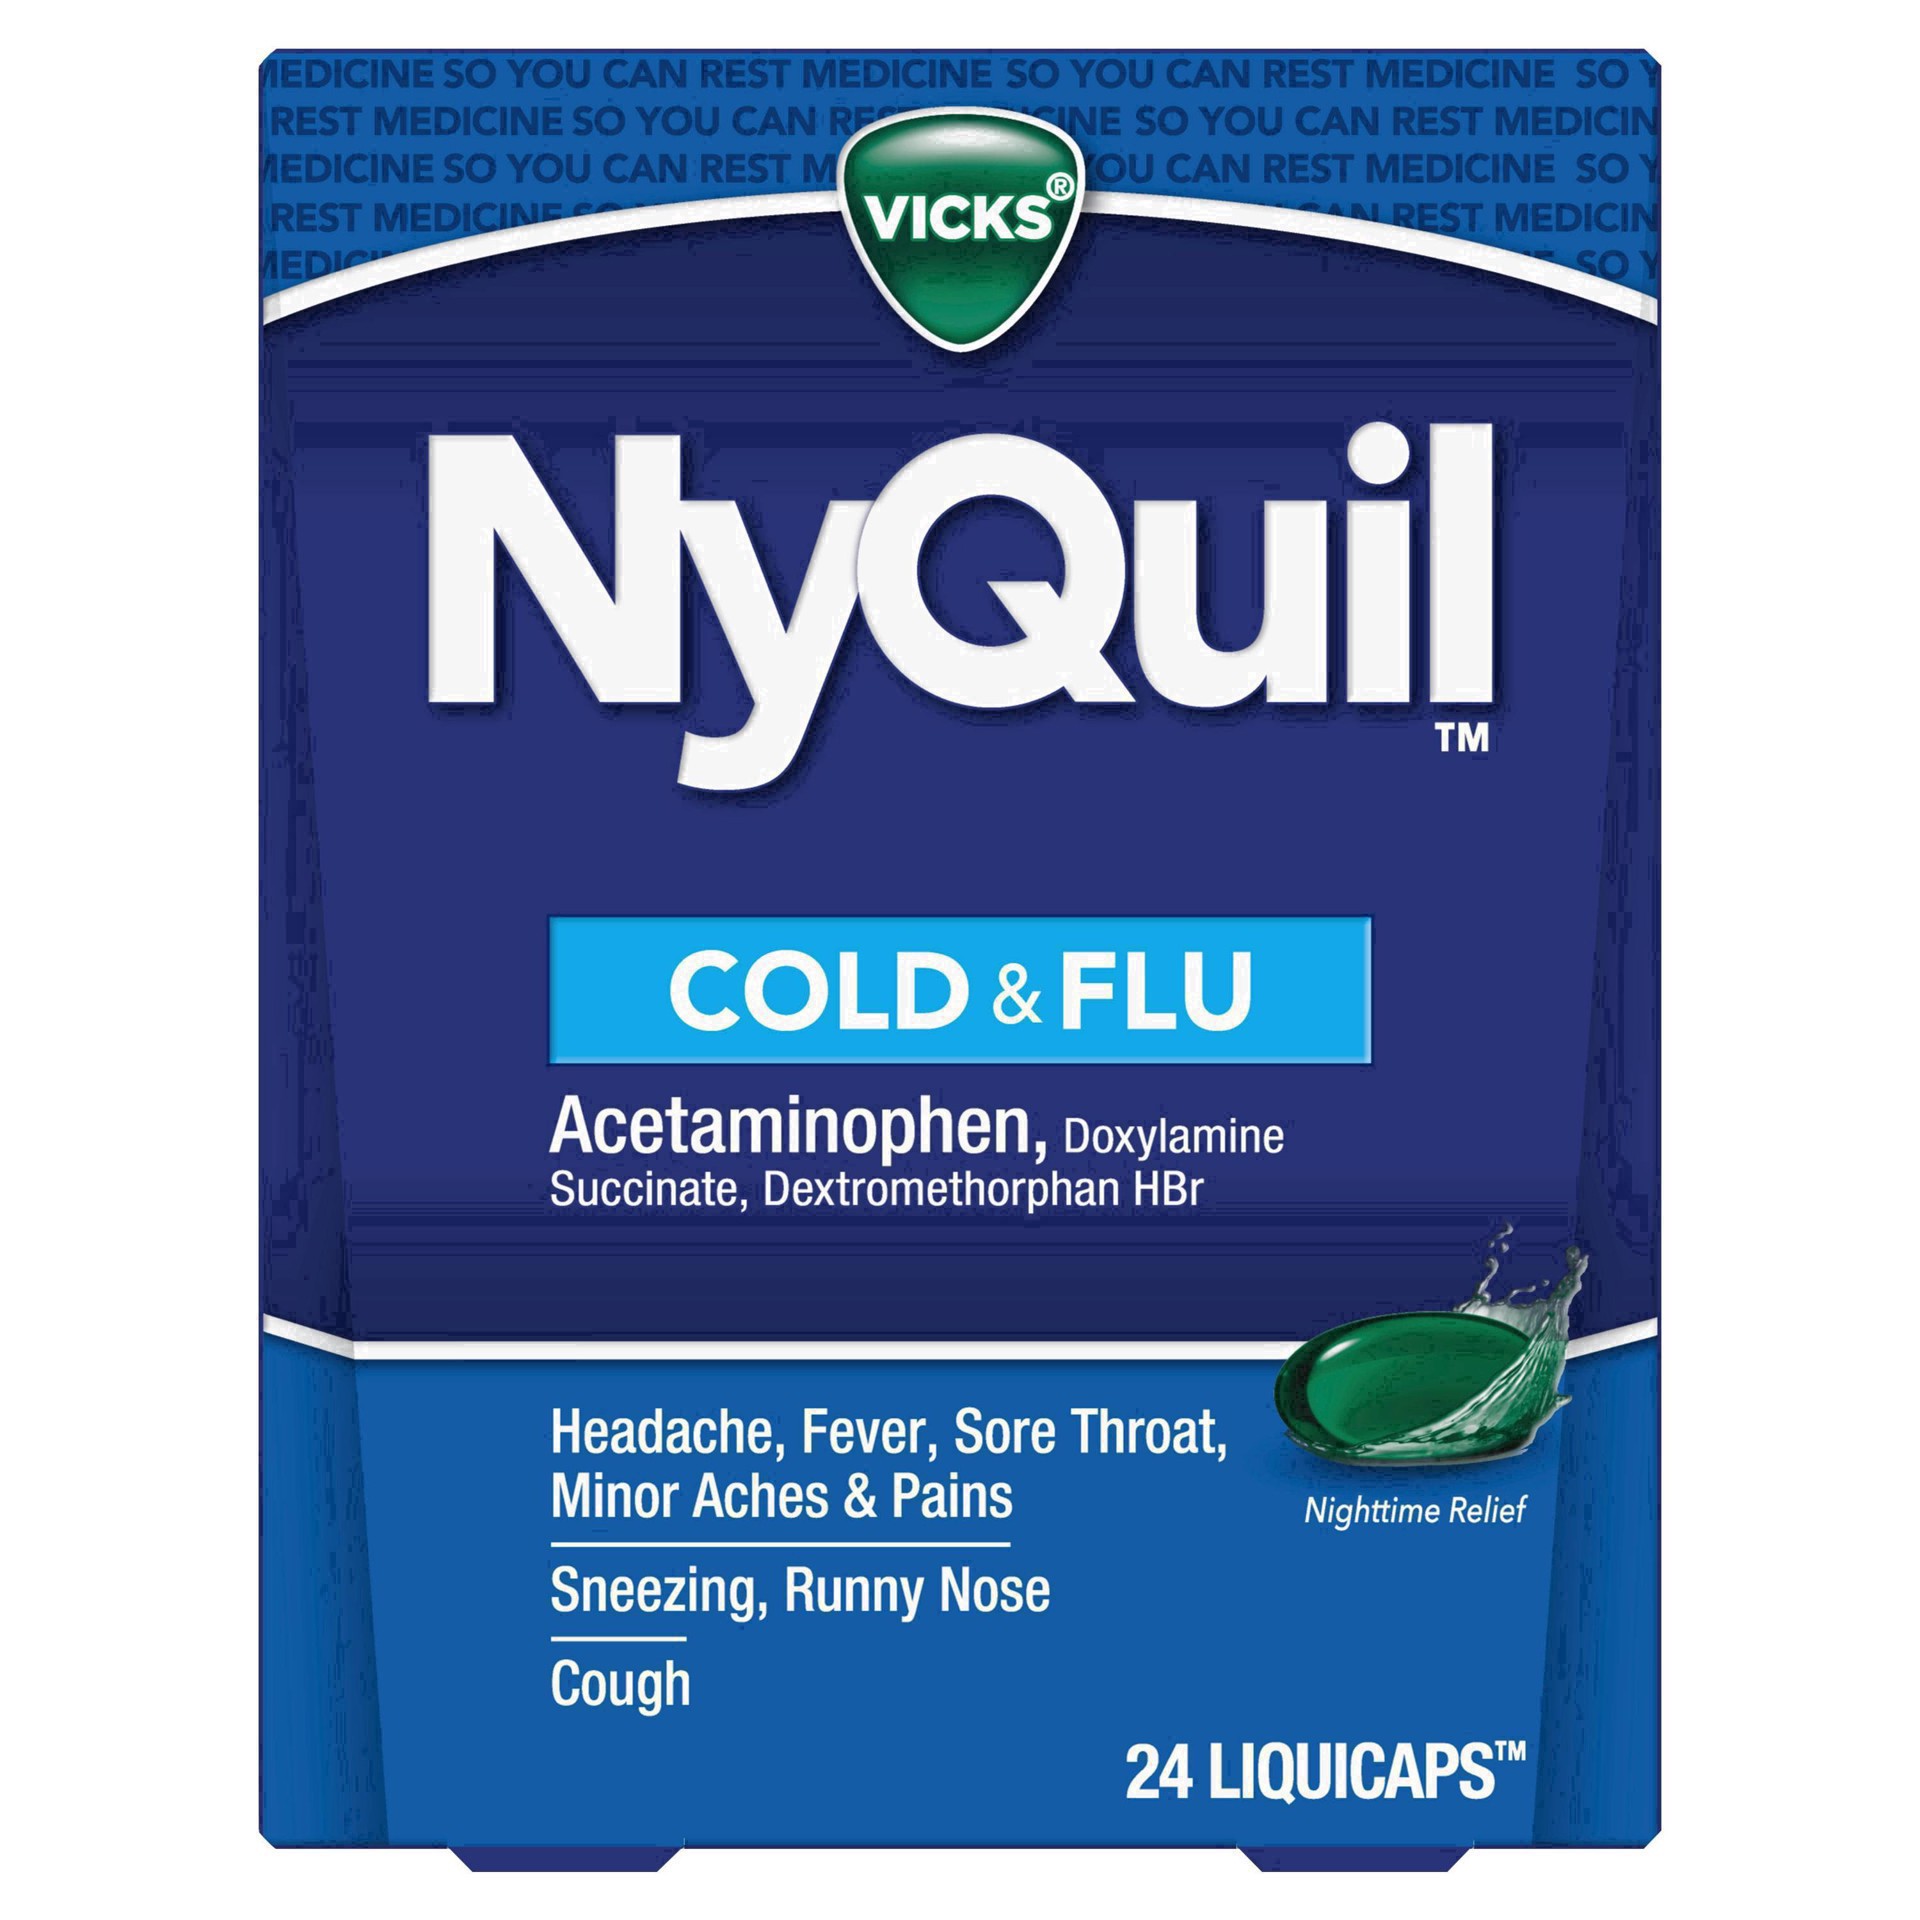 slide 45 of 68, NyQuil Vicks NyQuil Cold & Flu Medicine LiquiCaps - 24ct, 24 ct